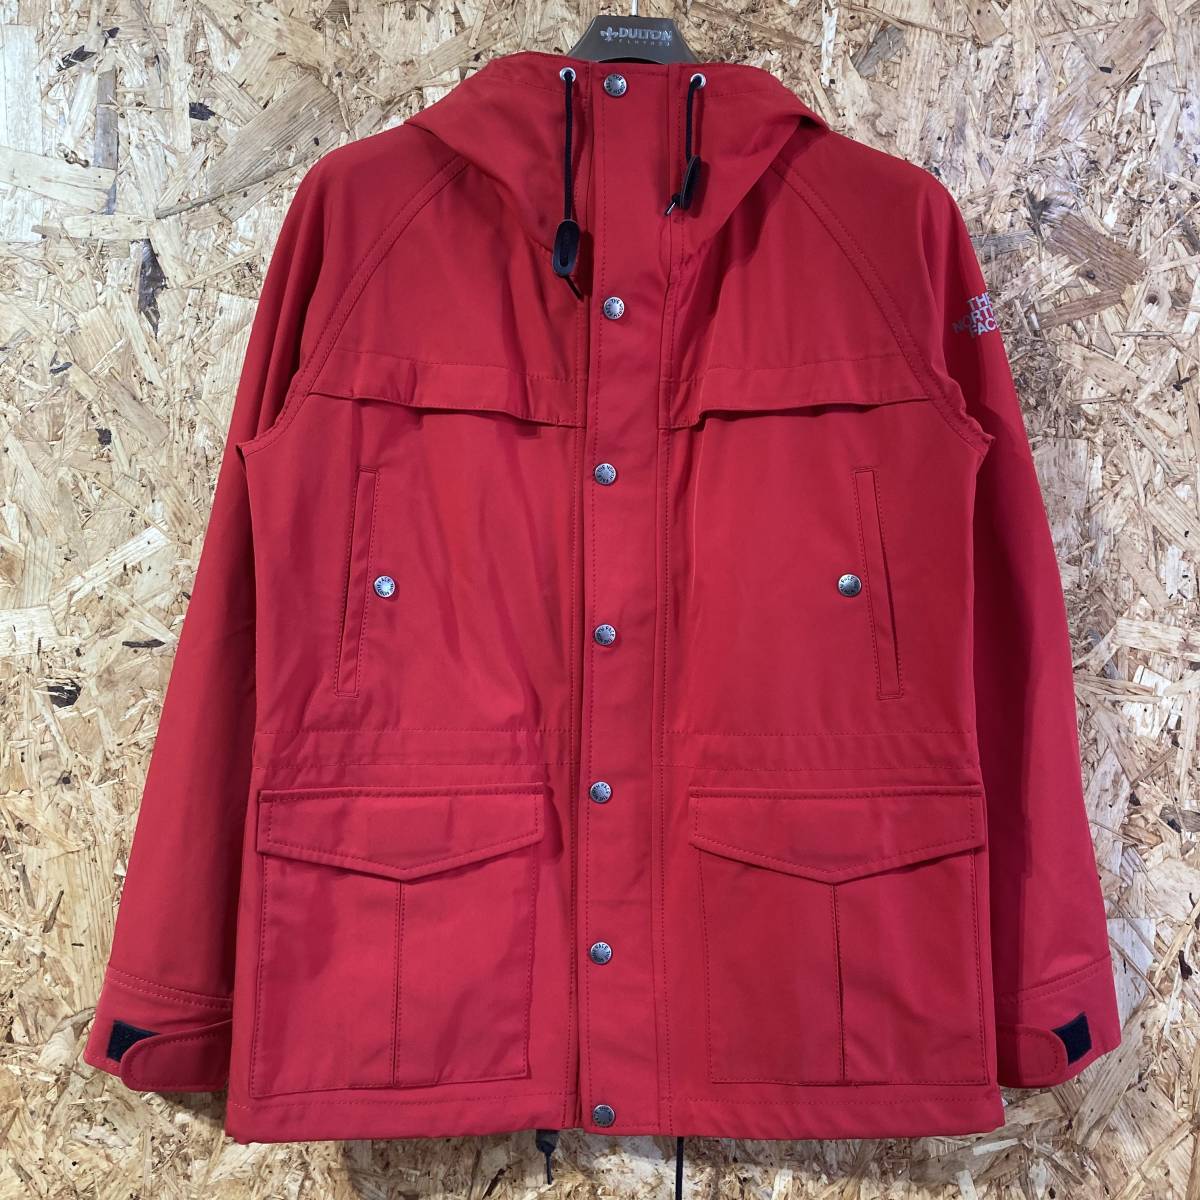 COMME des GARCONS THE NORTH FACE マウンテンパーカー M コラボ 別注 限定 ノースフェイス GORE TEX WIND STOPPER eYe JUNYA WATANABE MAN